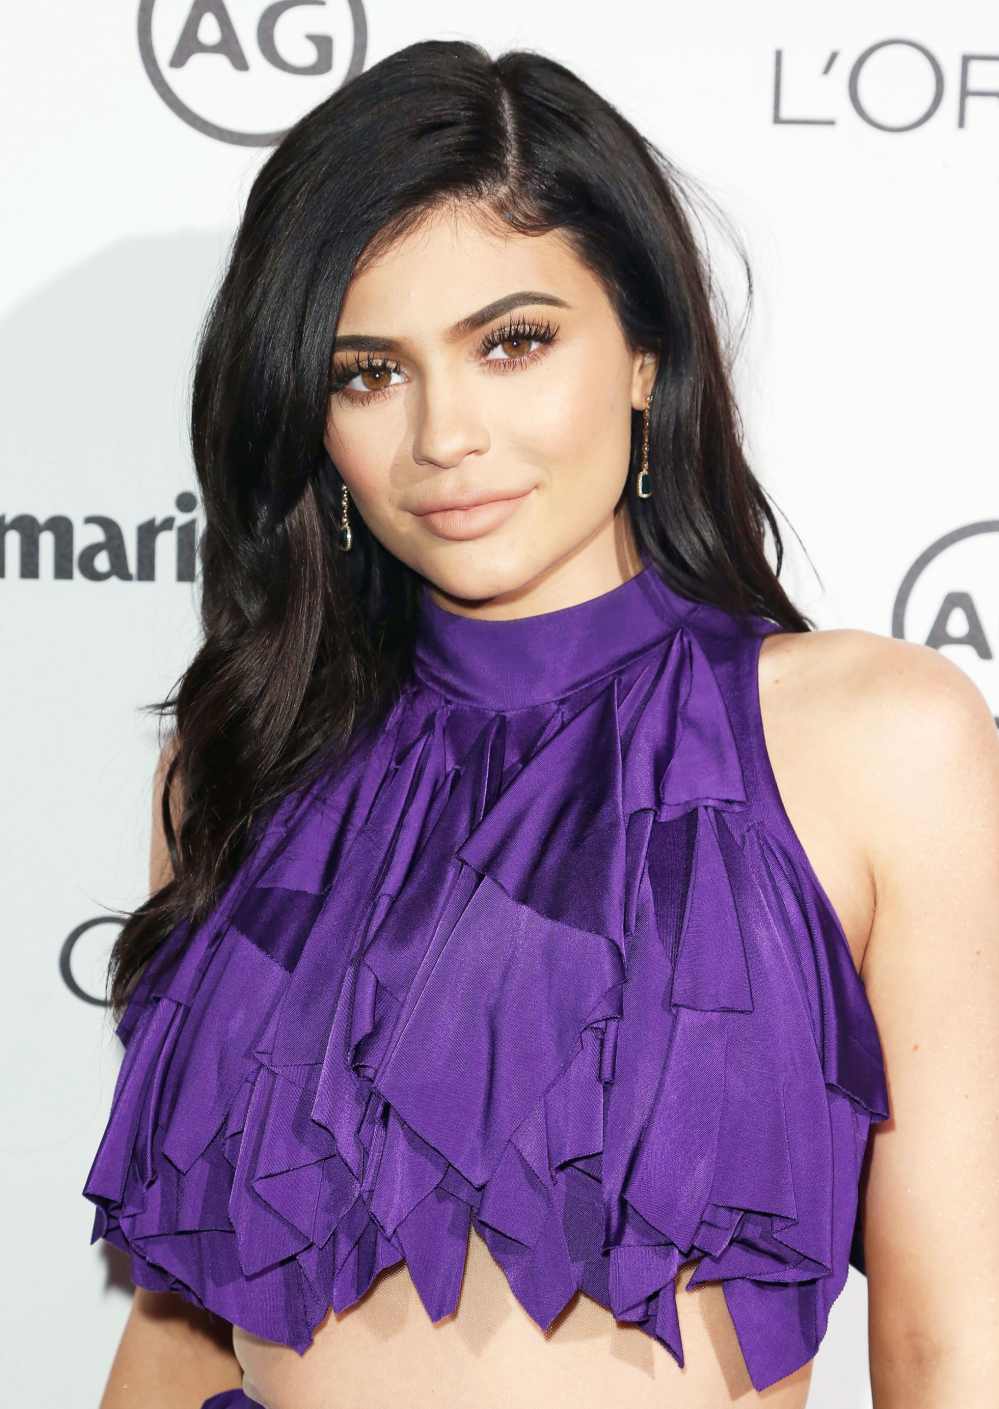 Kylie Jenner's Coty Business Deal